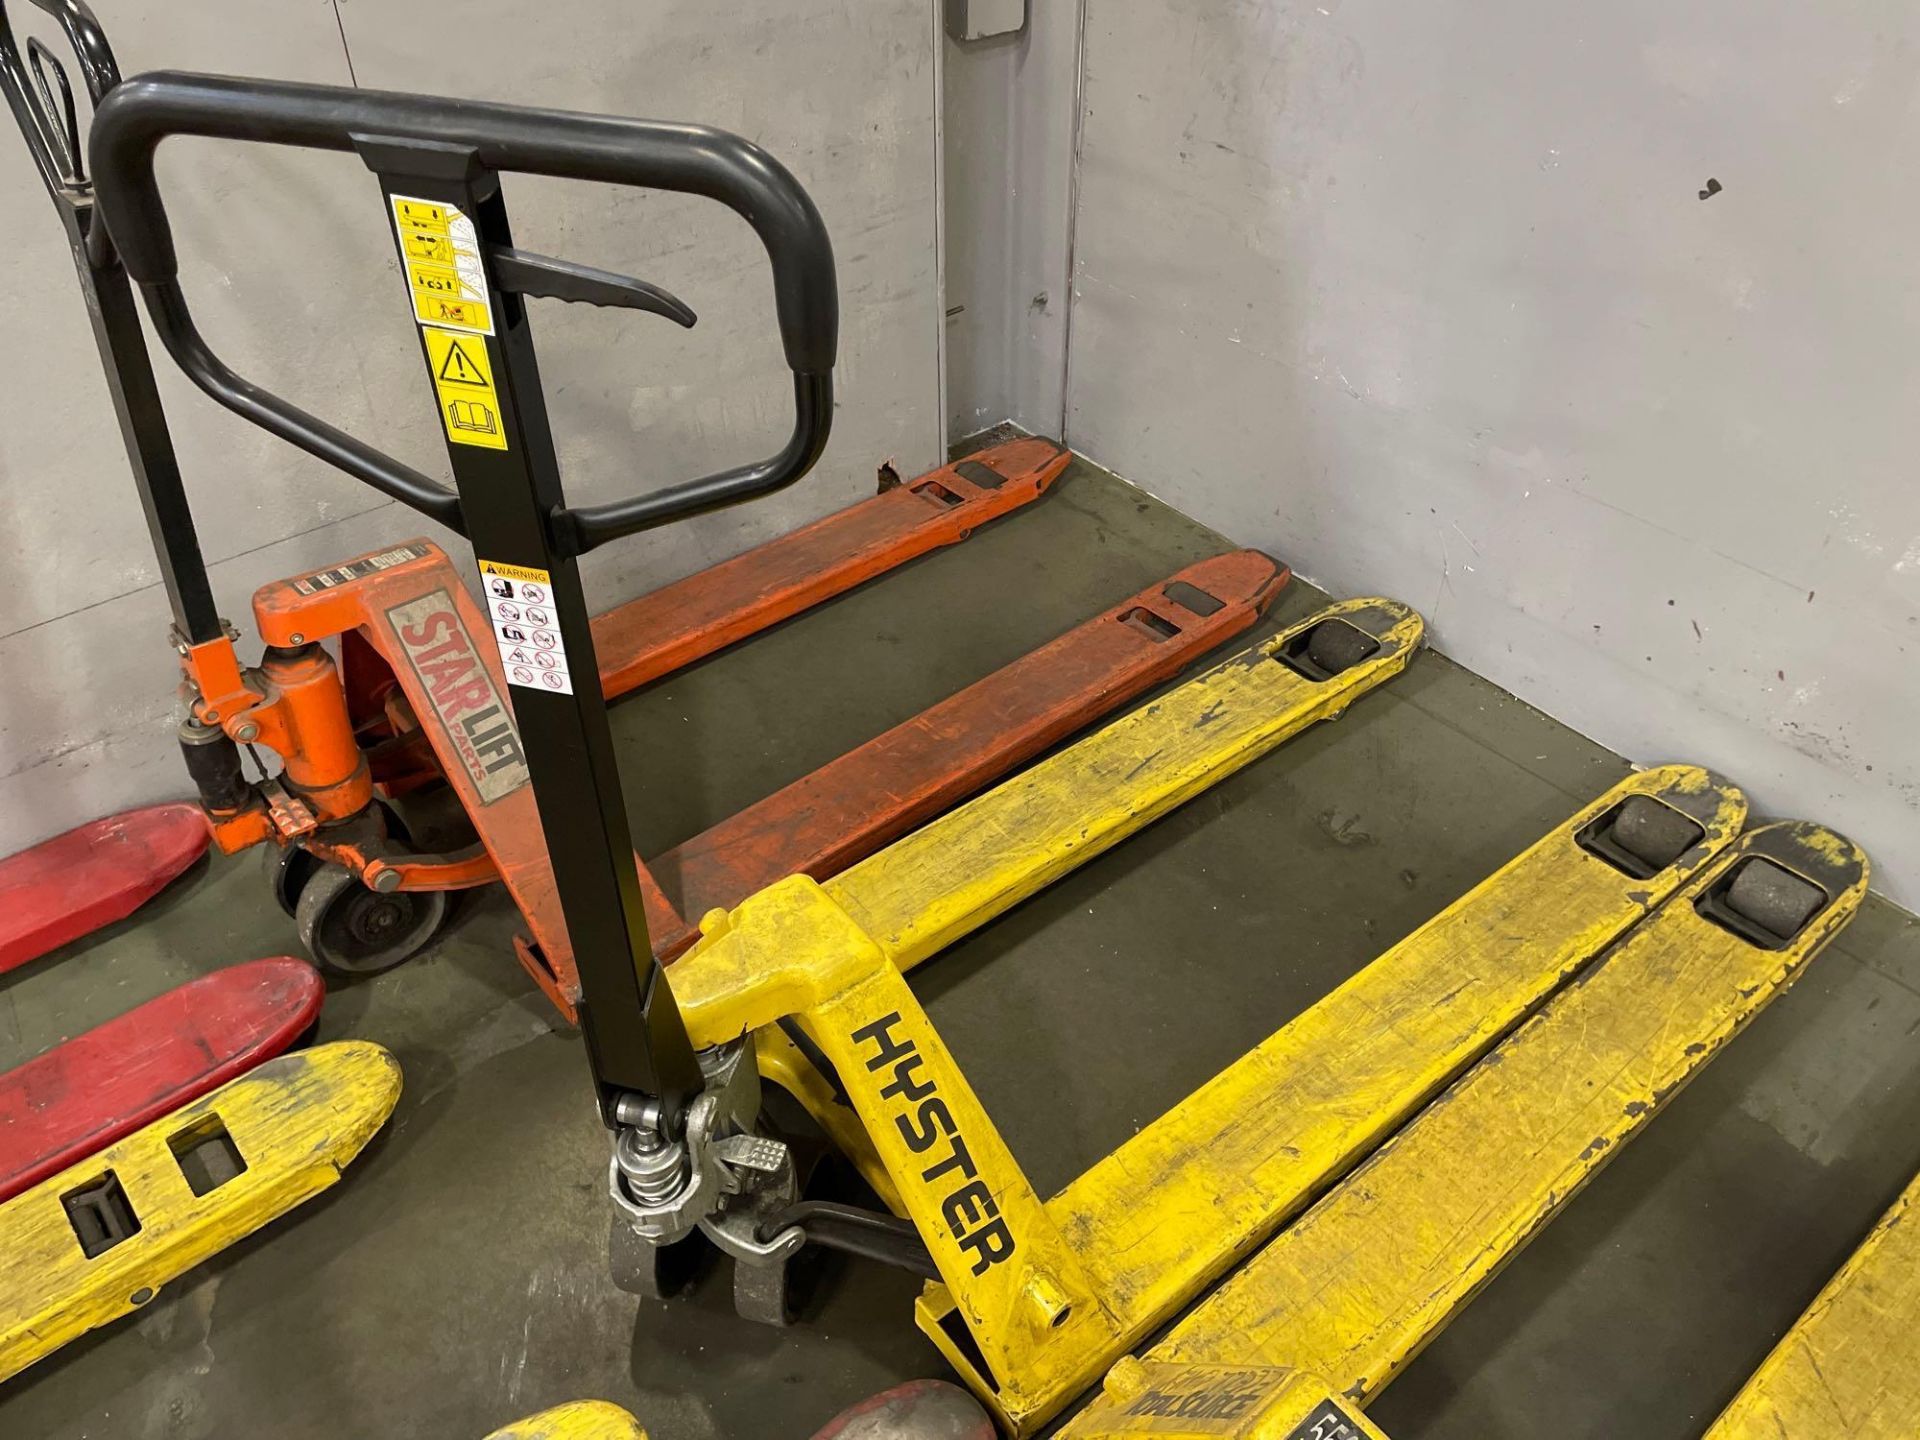 Lot of 2 Pallet Jacks: (1) Pape, max. 5,500 lbs., (1) Hyster, max. 5,500 lbs. - Image 3 of 4